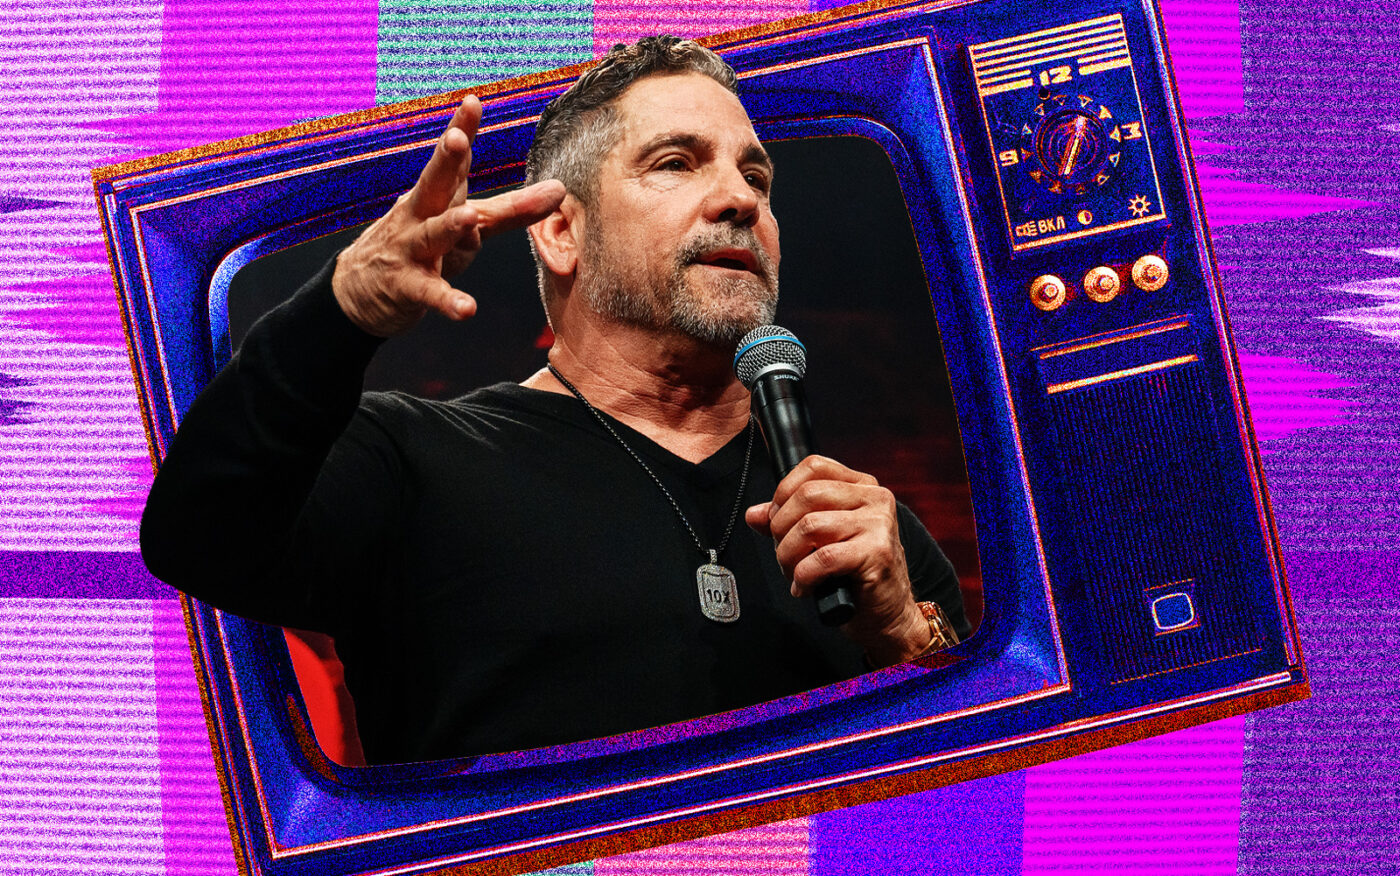 Grant Cardone Jumps Back Into Reality Television